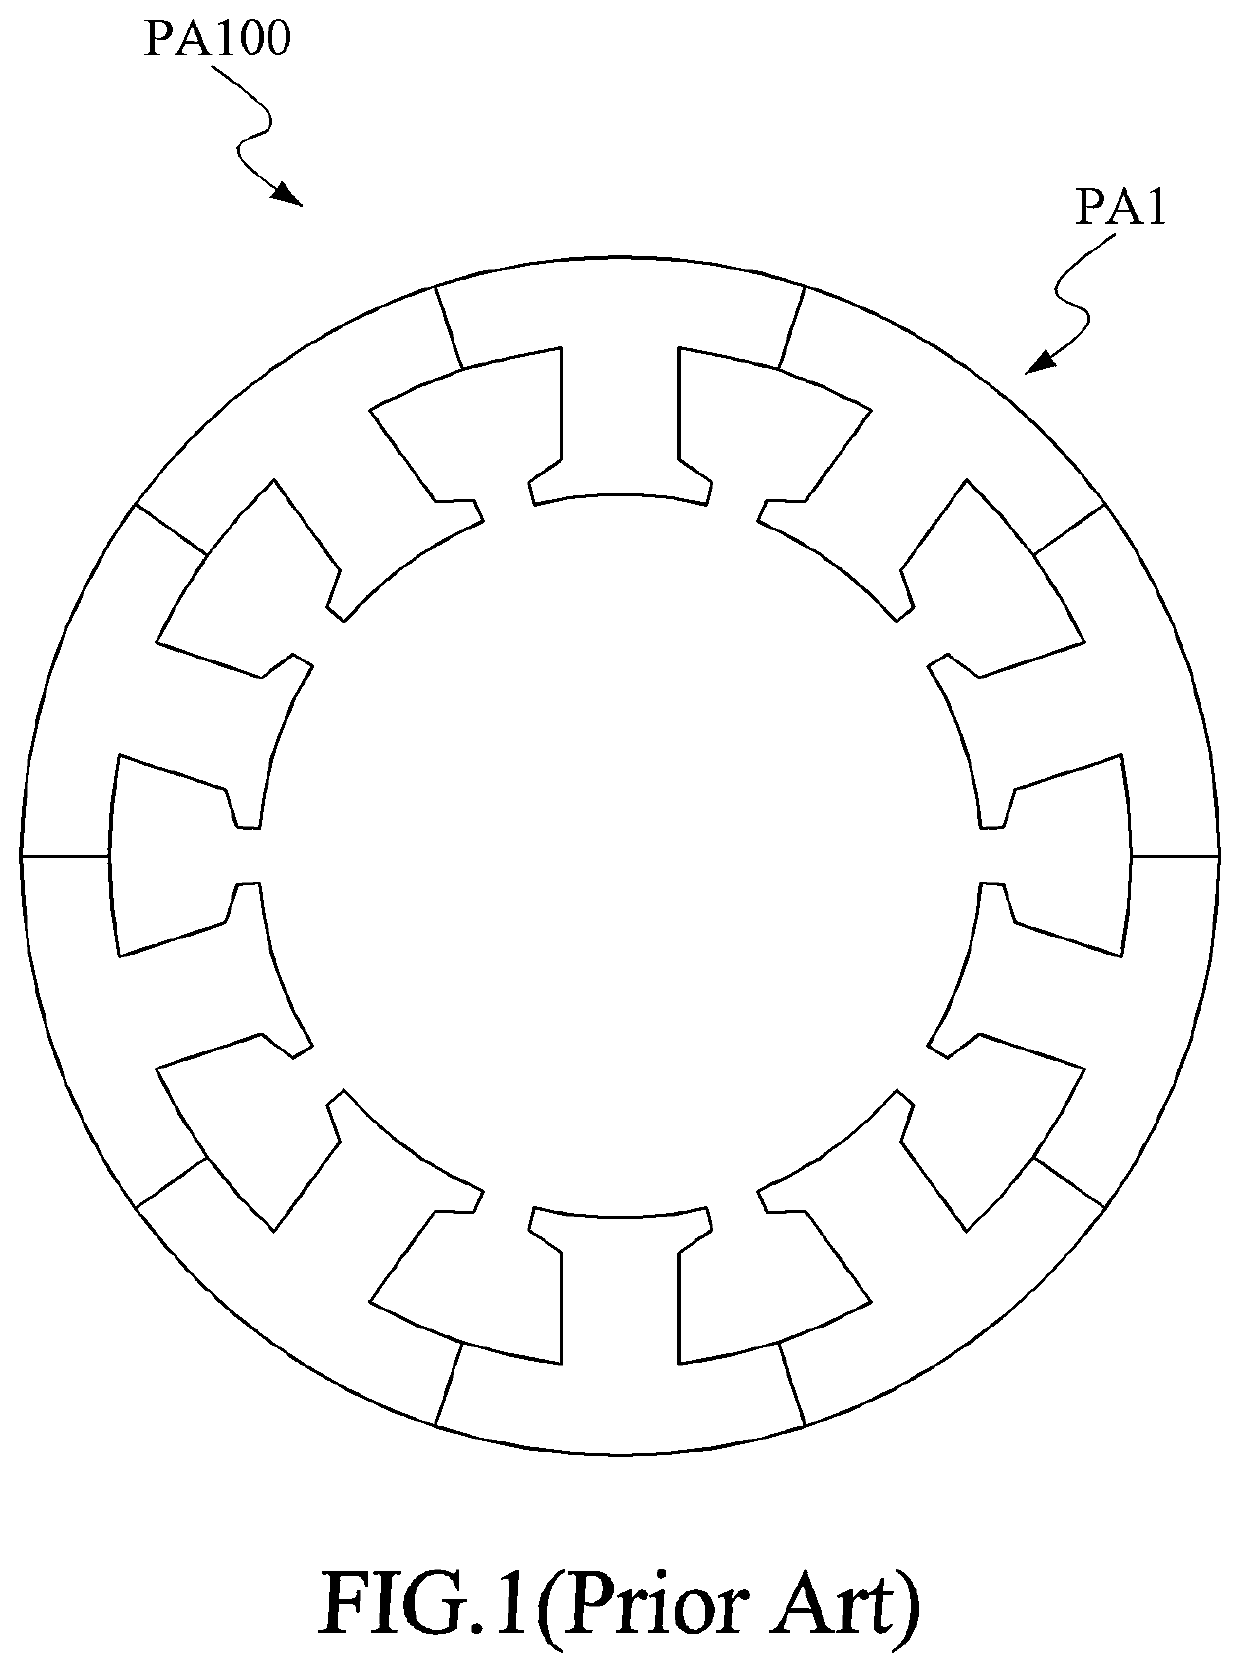 Stator tooth with stator-tooth arc-cutting structure